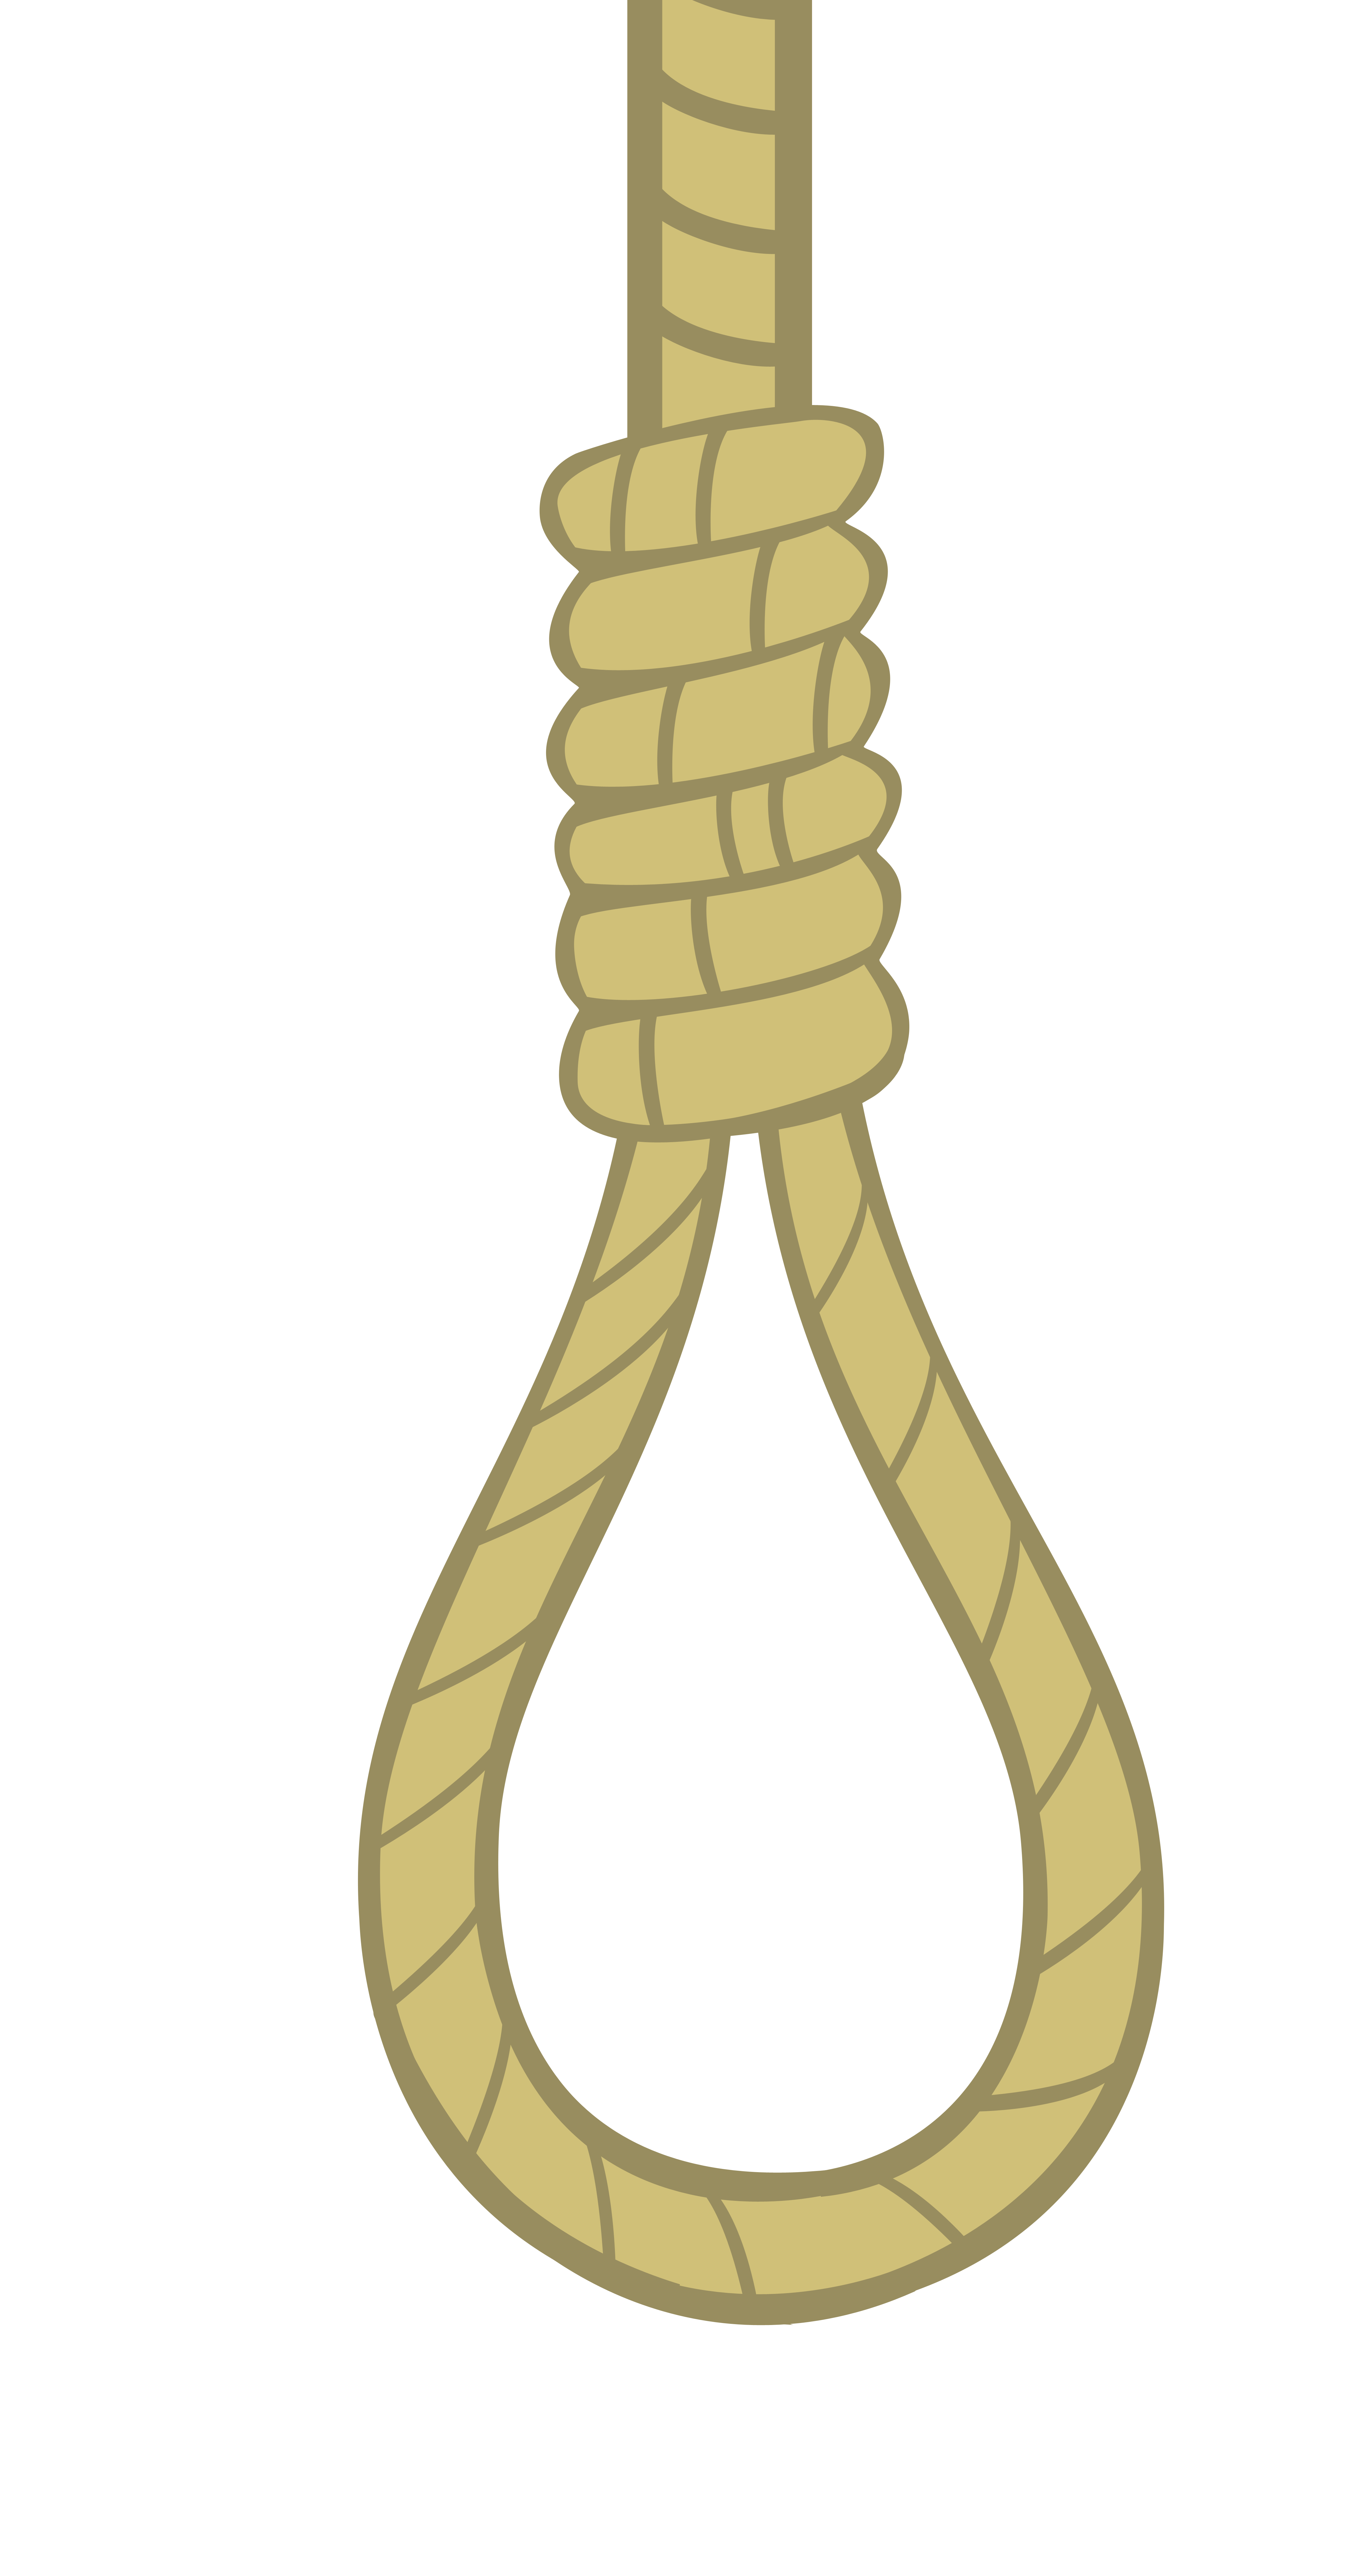 noose_by_sofunnyguy-d60fey1.png